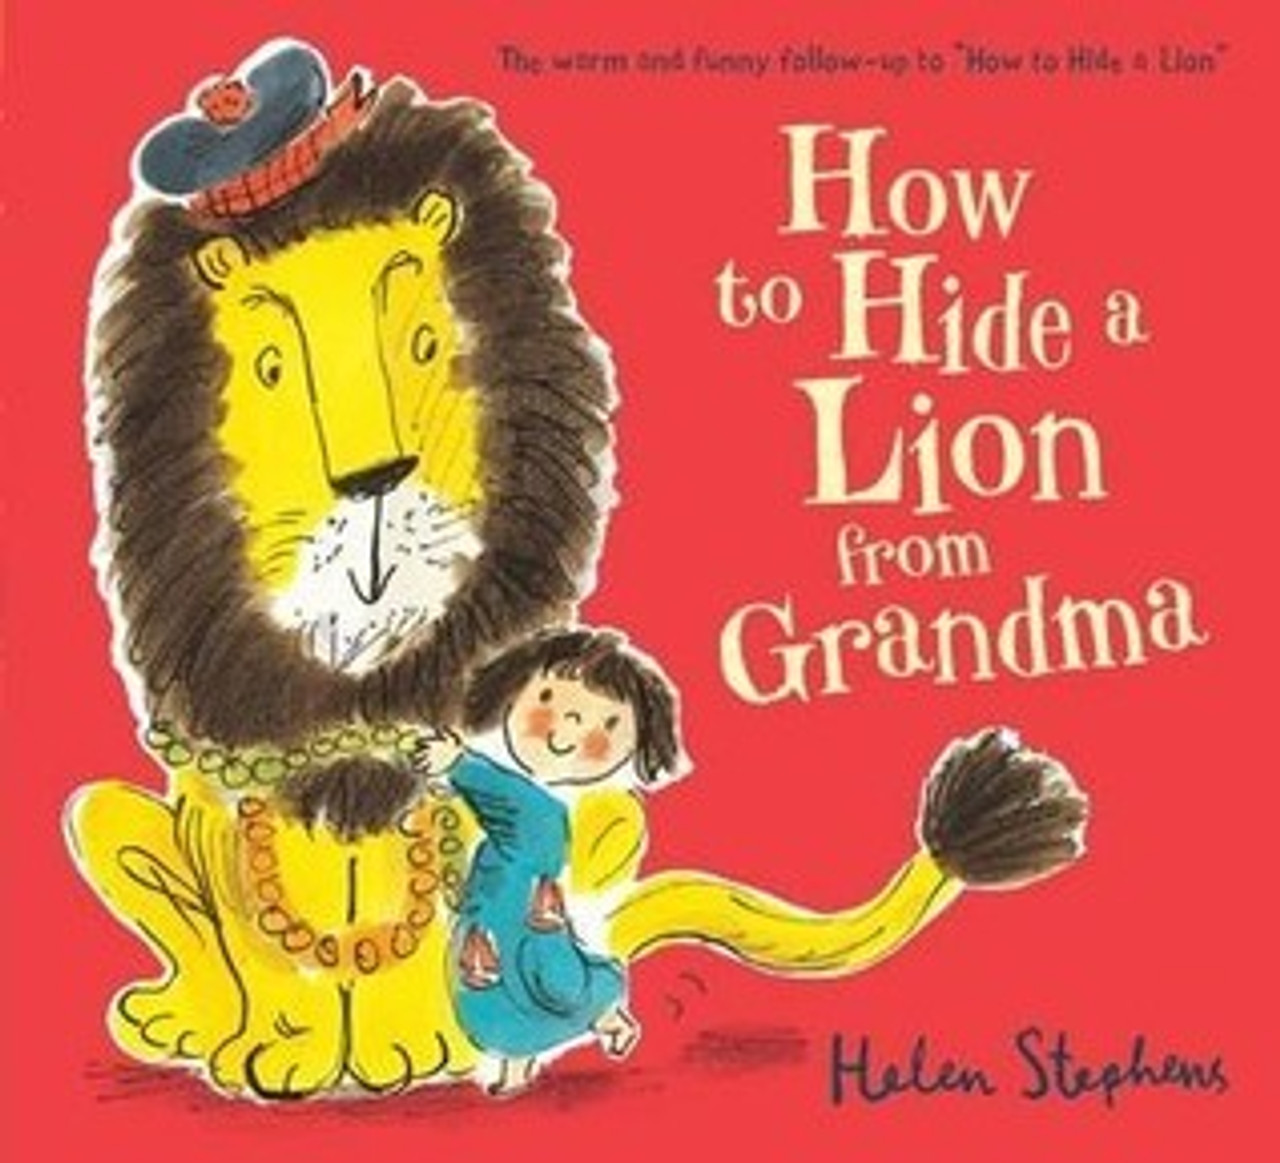 Helen Stephens / How to Hide a Lion from Grandma (Children's Picture Book)